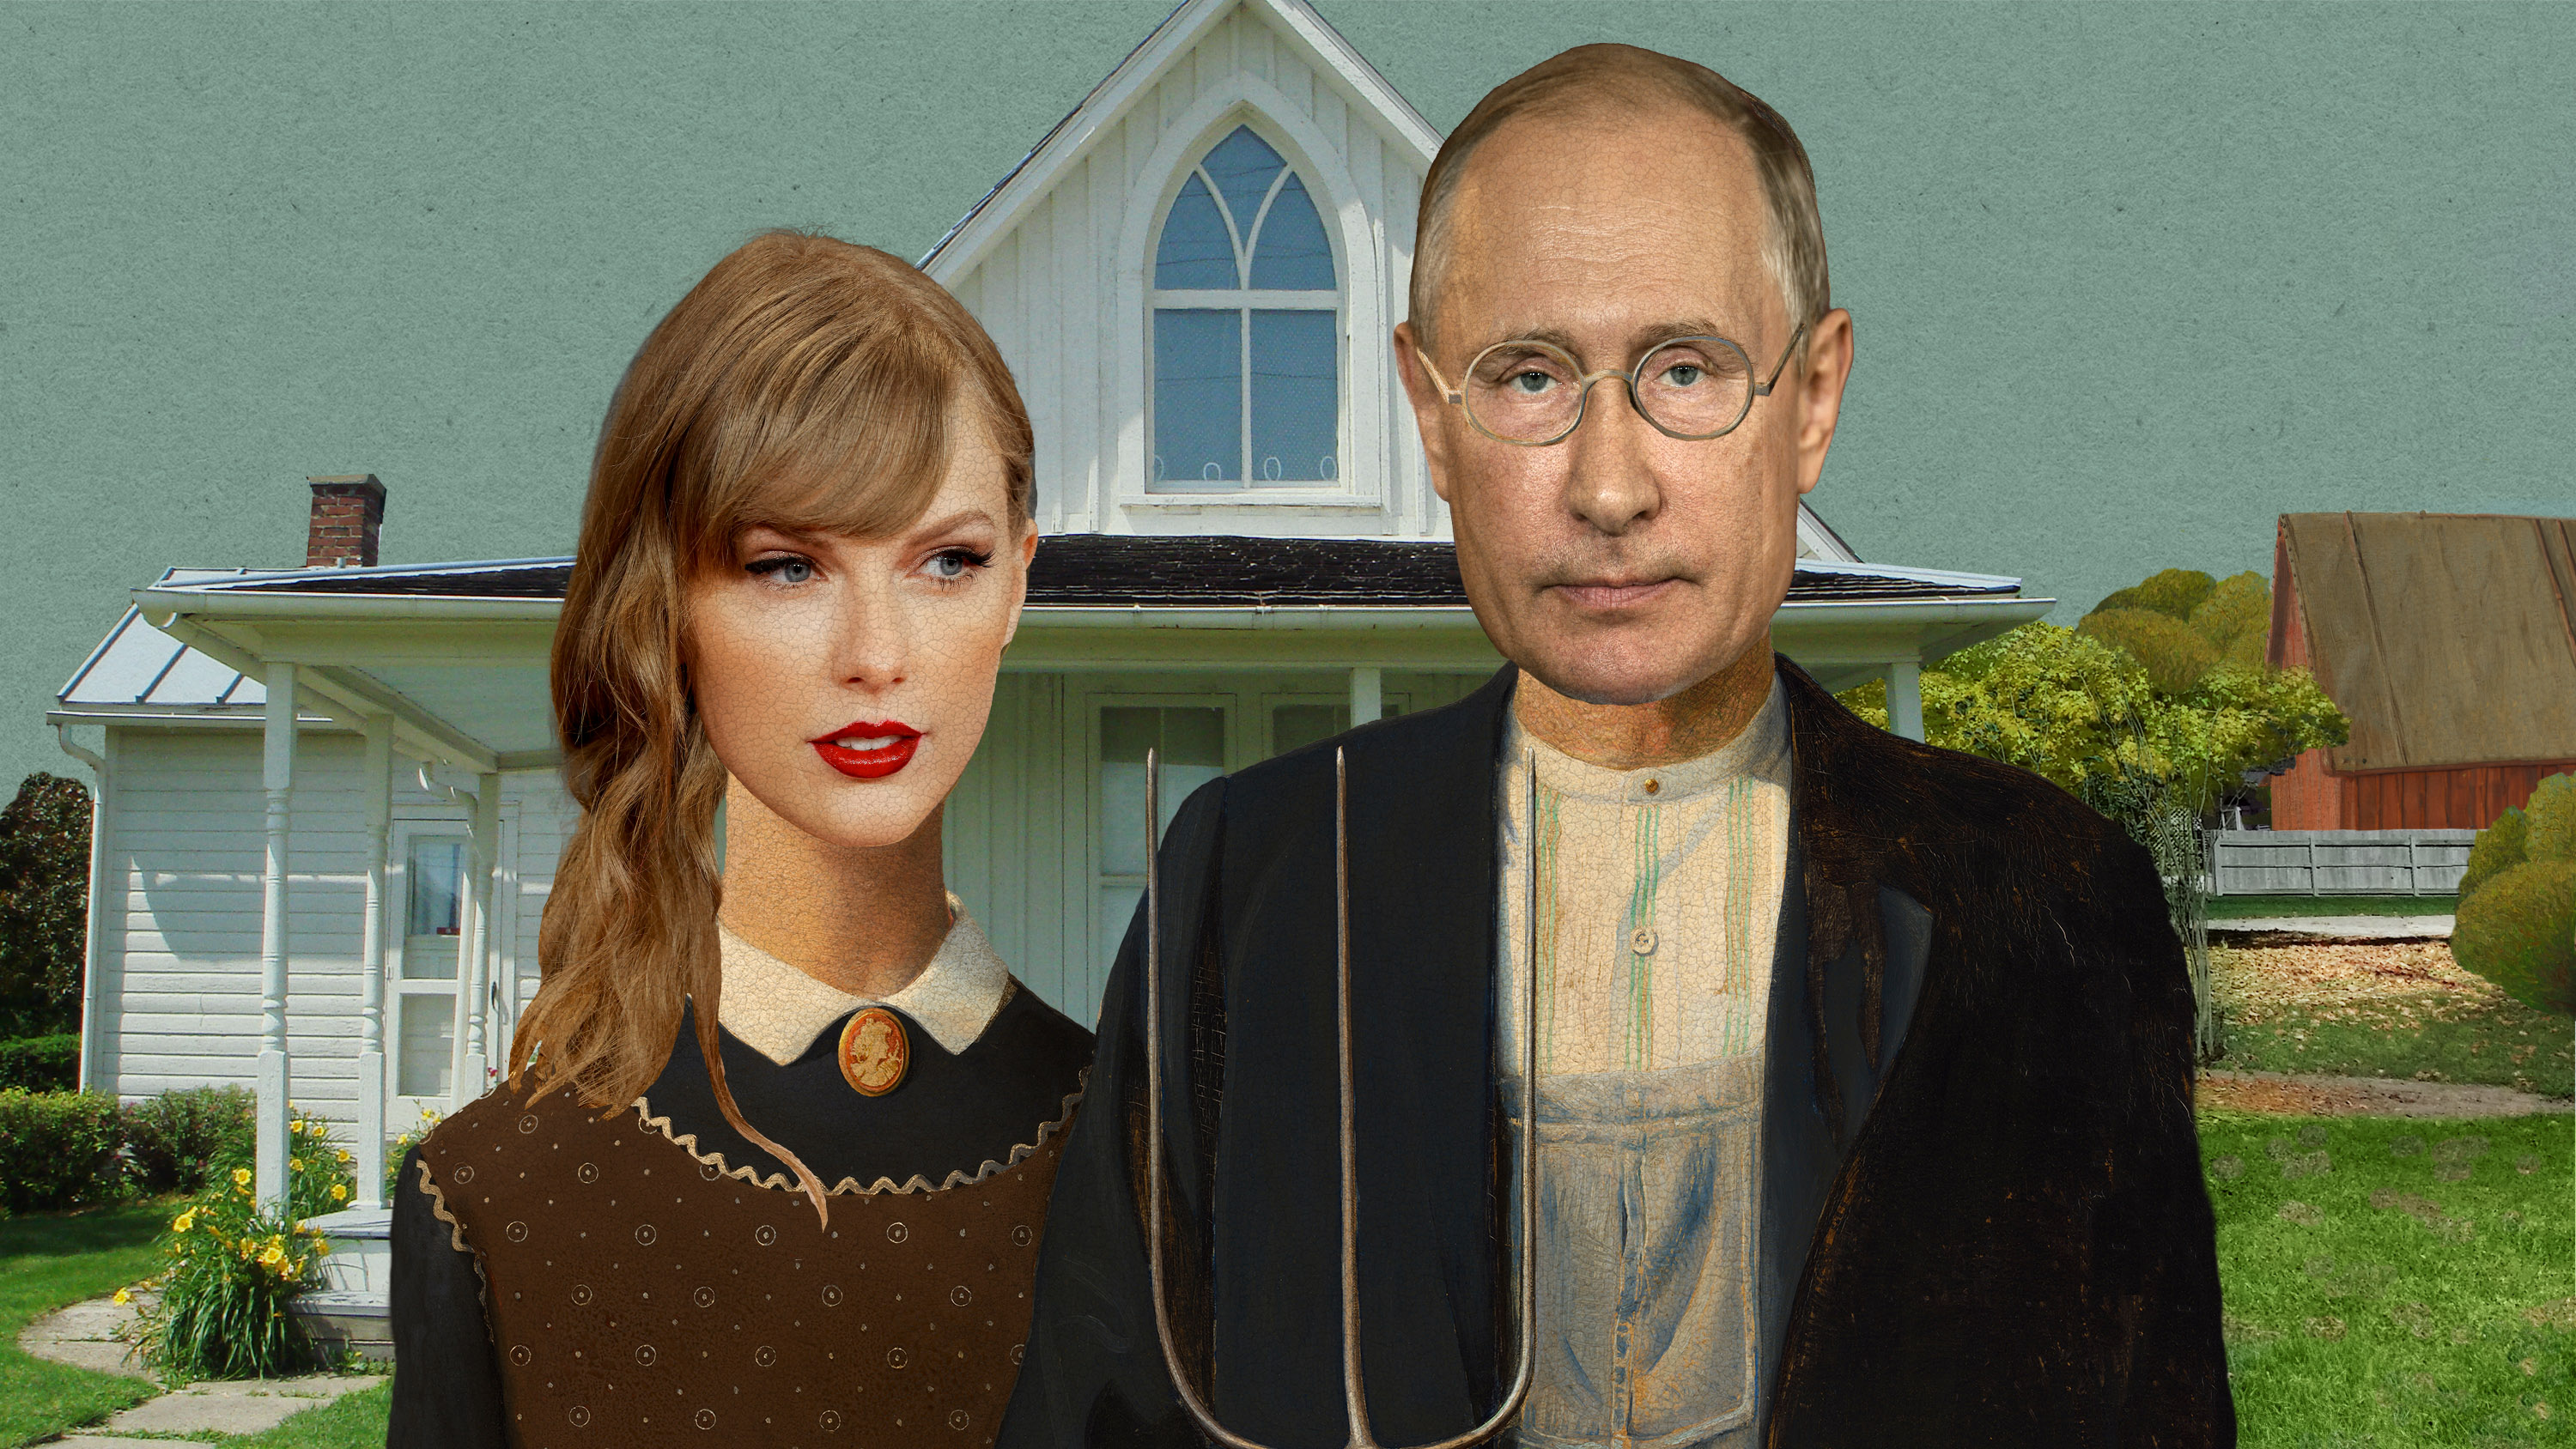 Taylor Swift and Vladimir Putin in the style of American Gothic